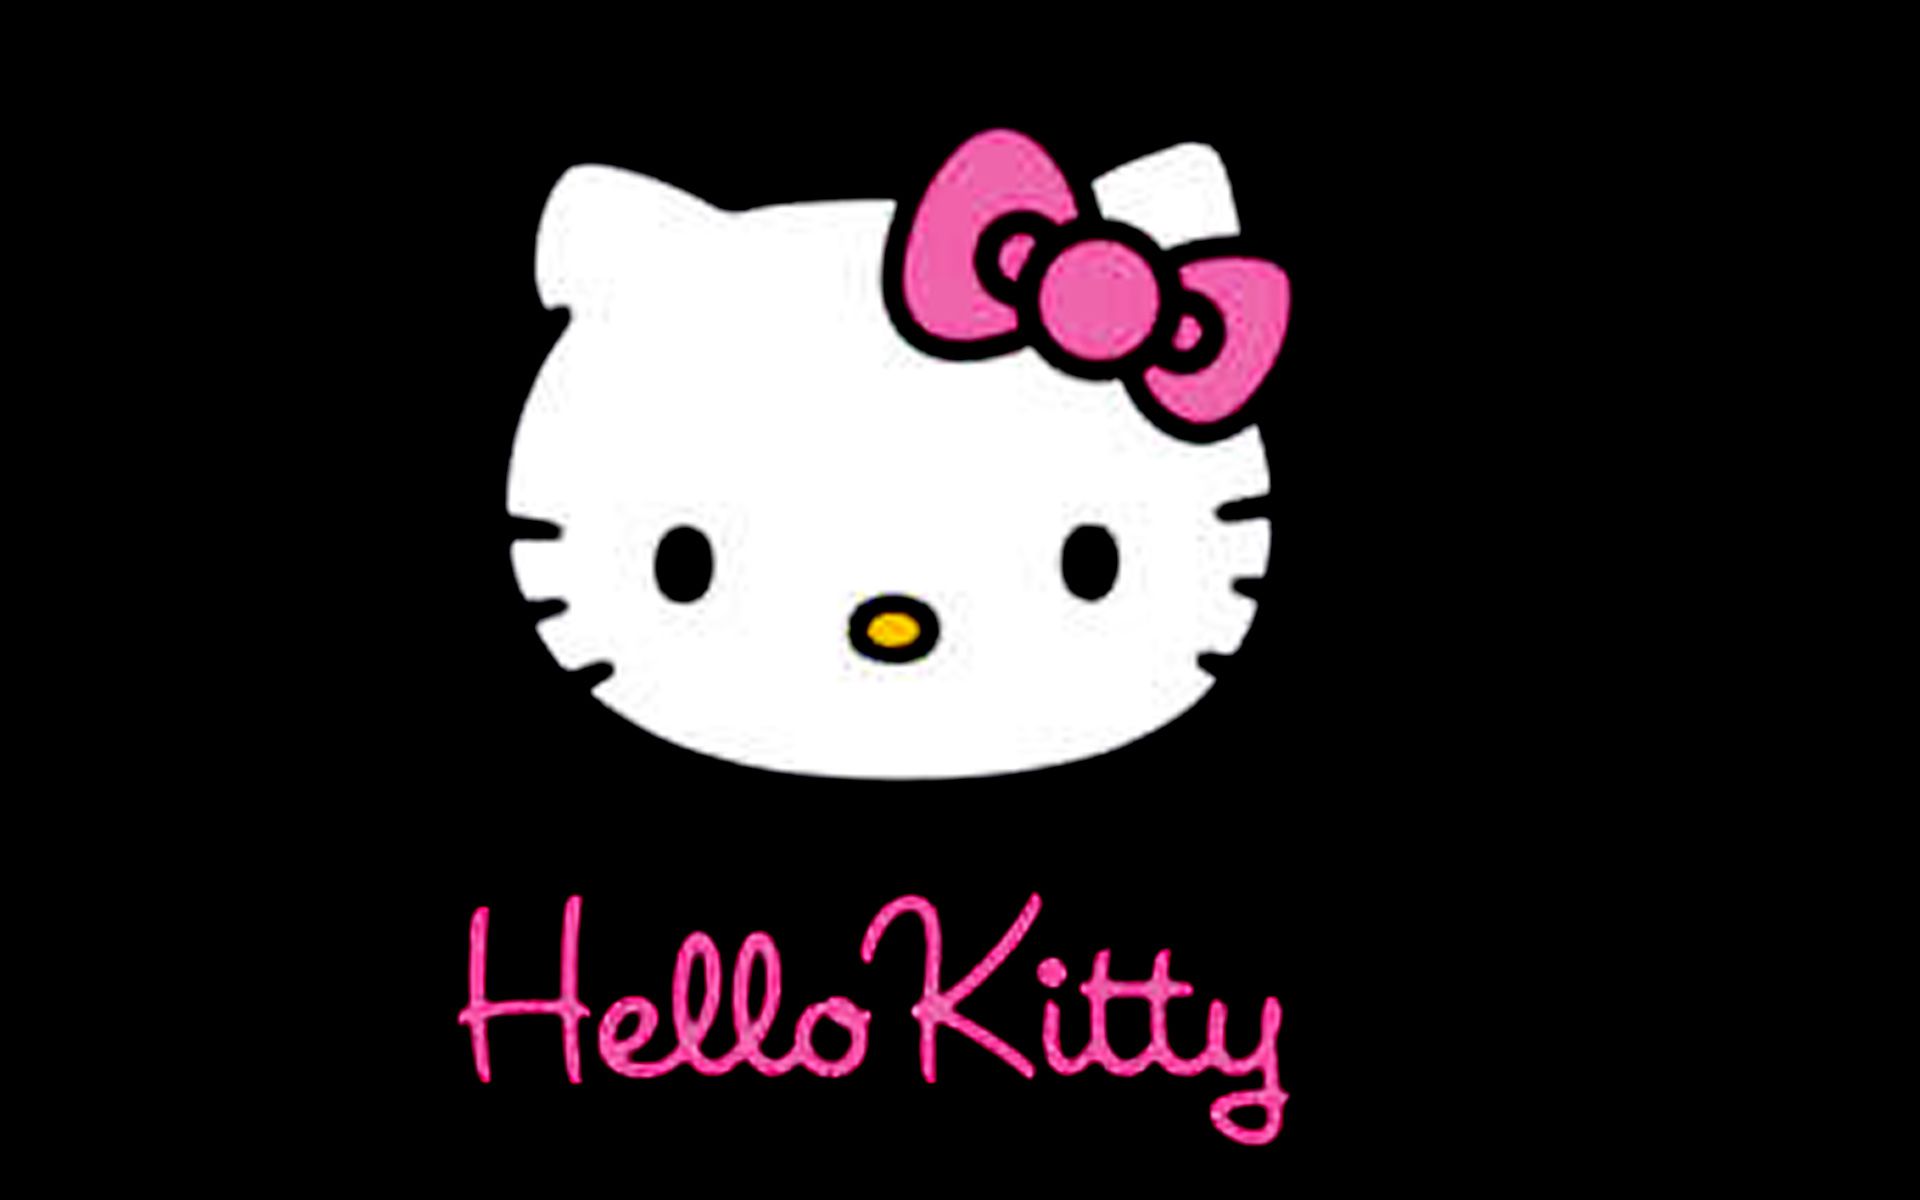 Download Hello Kitty Black Wallpaper 1920x1200 Full HD Backgrounds